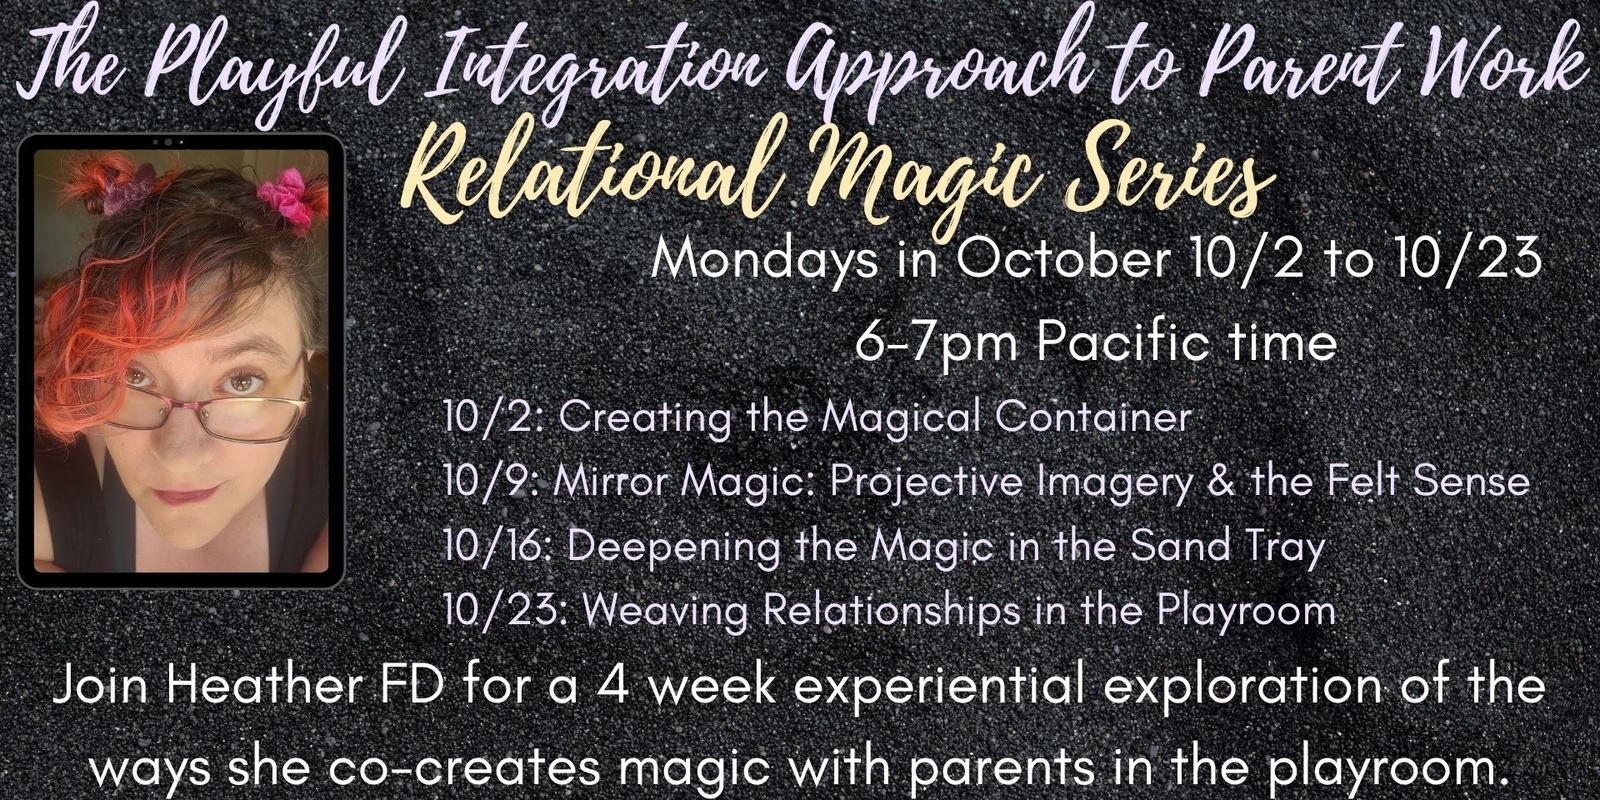 Banner image for Playful Integration's Relational Magic Series on Parent Work in Play Therapy